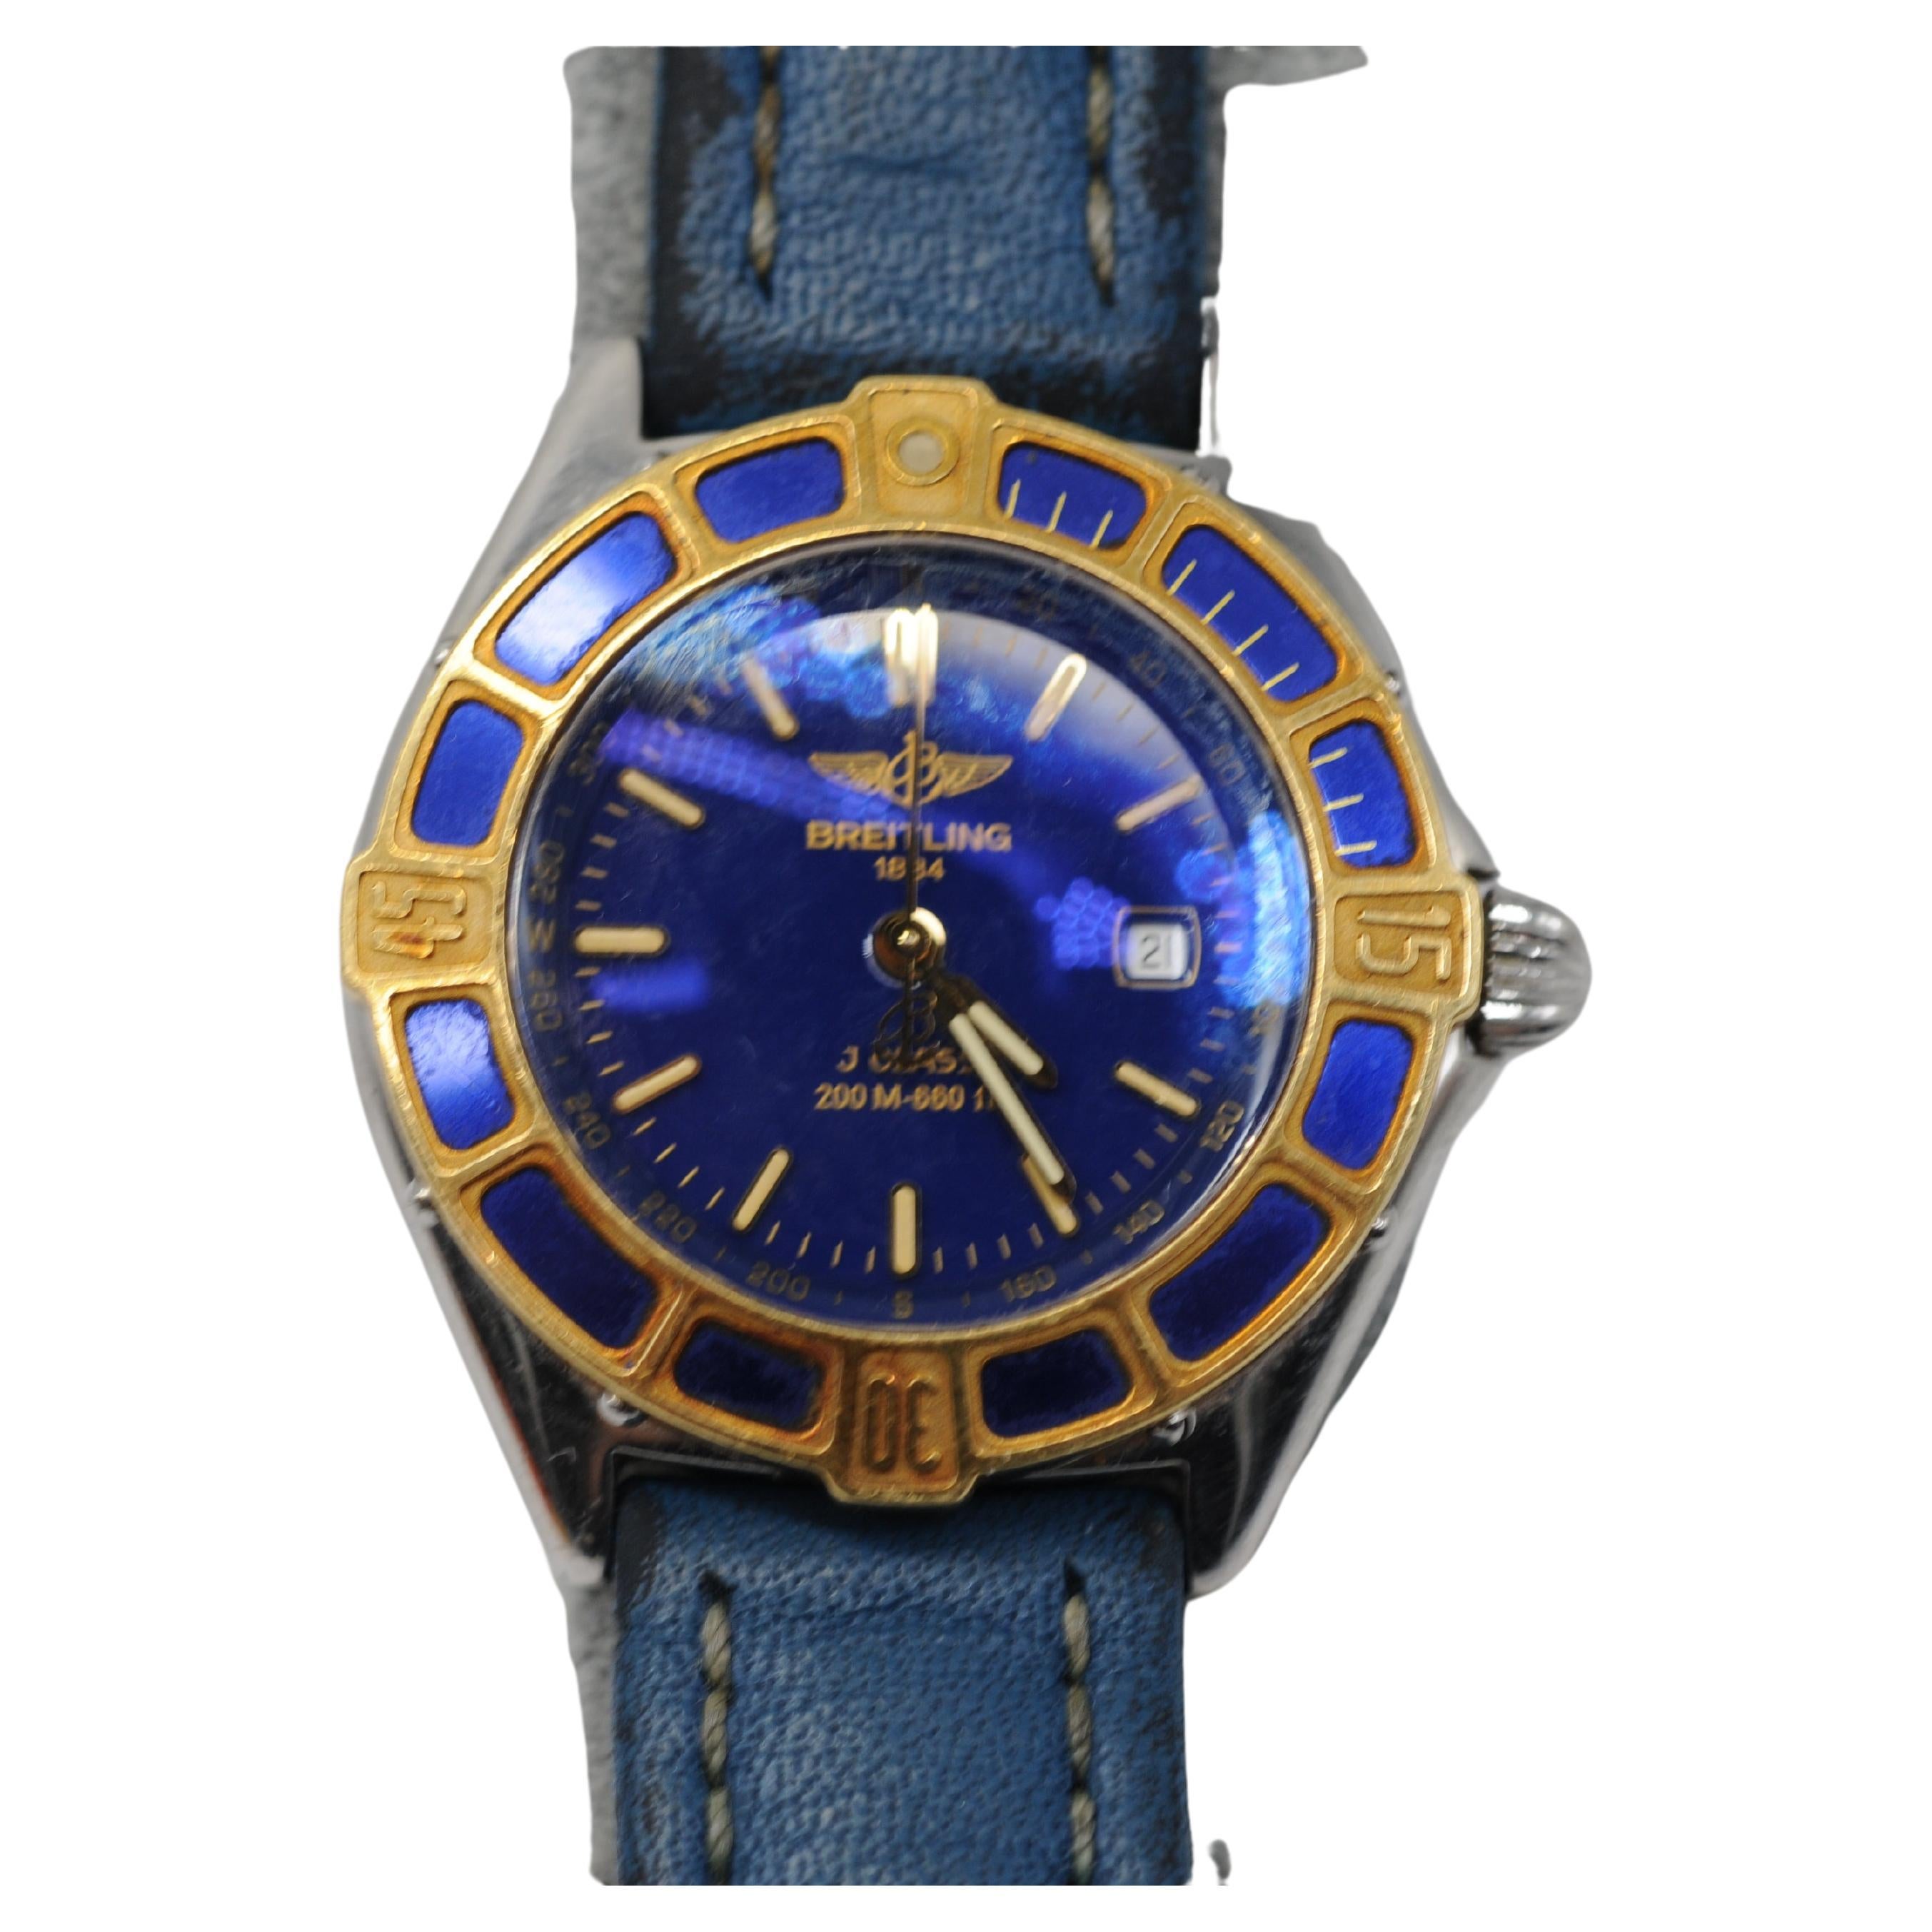 Breitling Lady J D52065 Quartz Watch Description

Brand: Breitling
Model: Lady J
Reference Number: D52065
Case Material: Stainless Steel/Gold
Case Diameter: 31x35mm
Band Material: Blue Leather
Wrist Size: Universal
Clasp: Original Breitling Folding